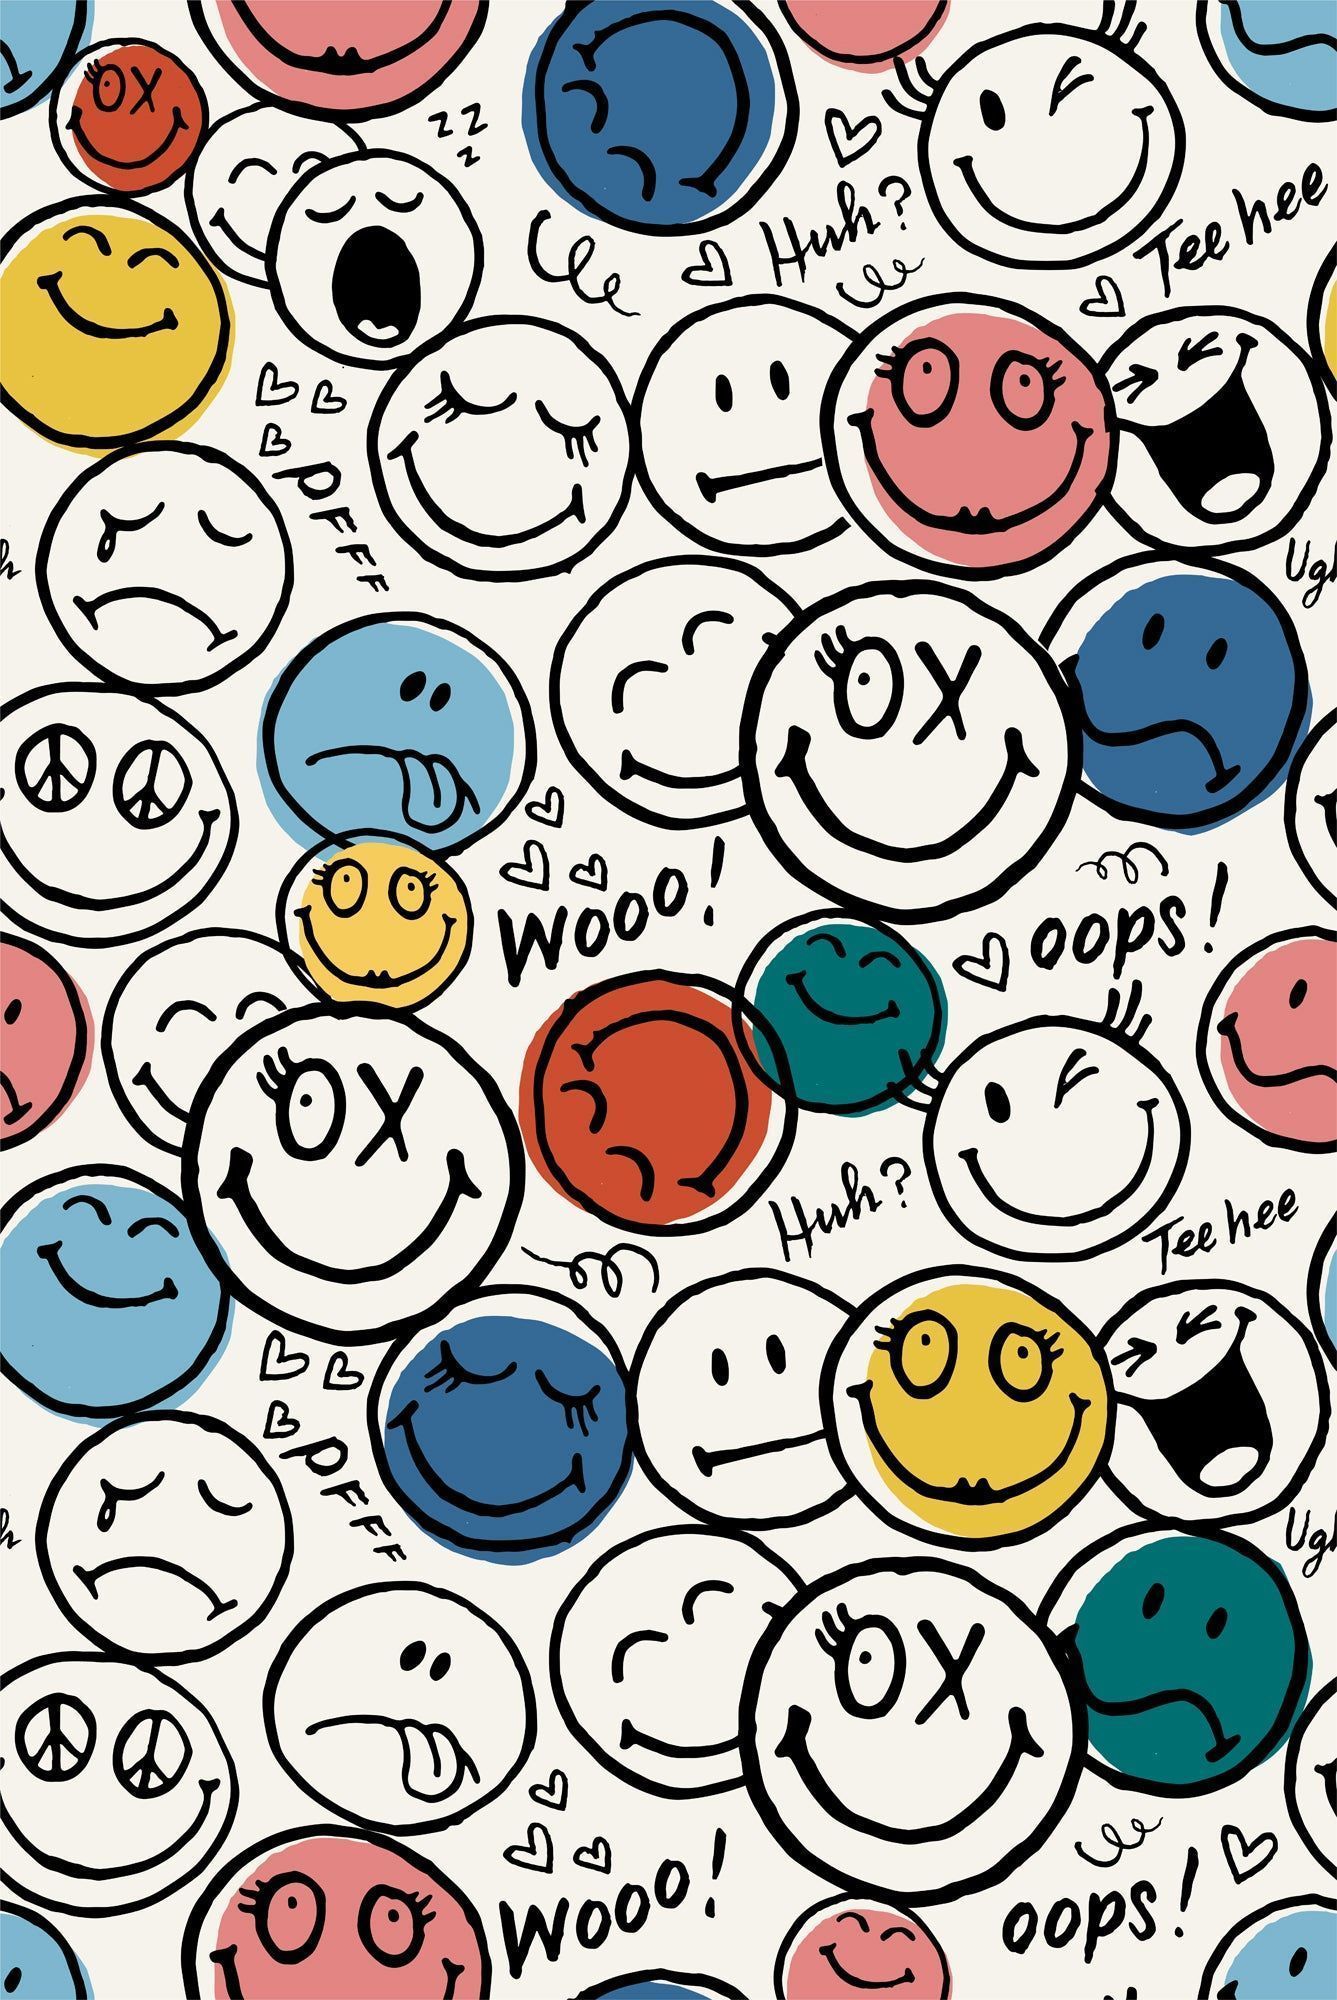 A wallpaper with many different emojis on it - Smiley